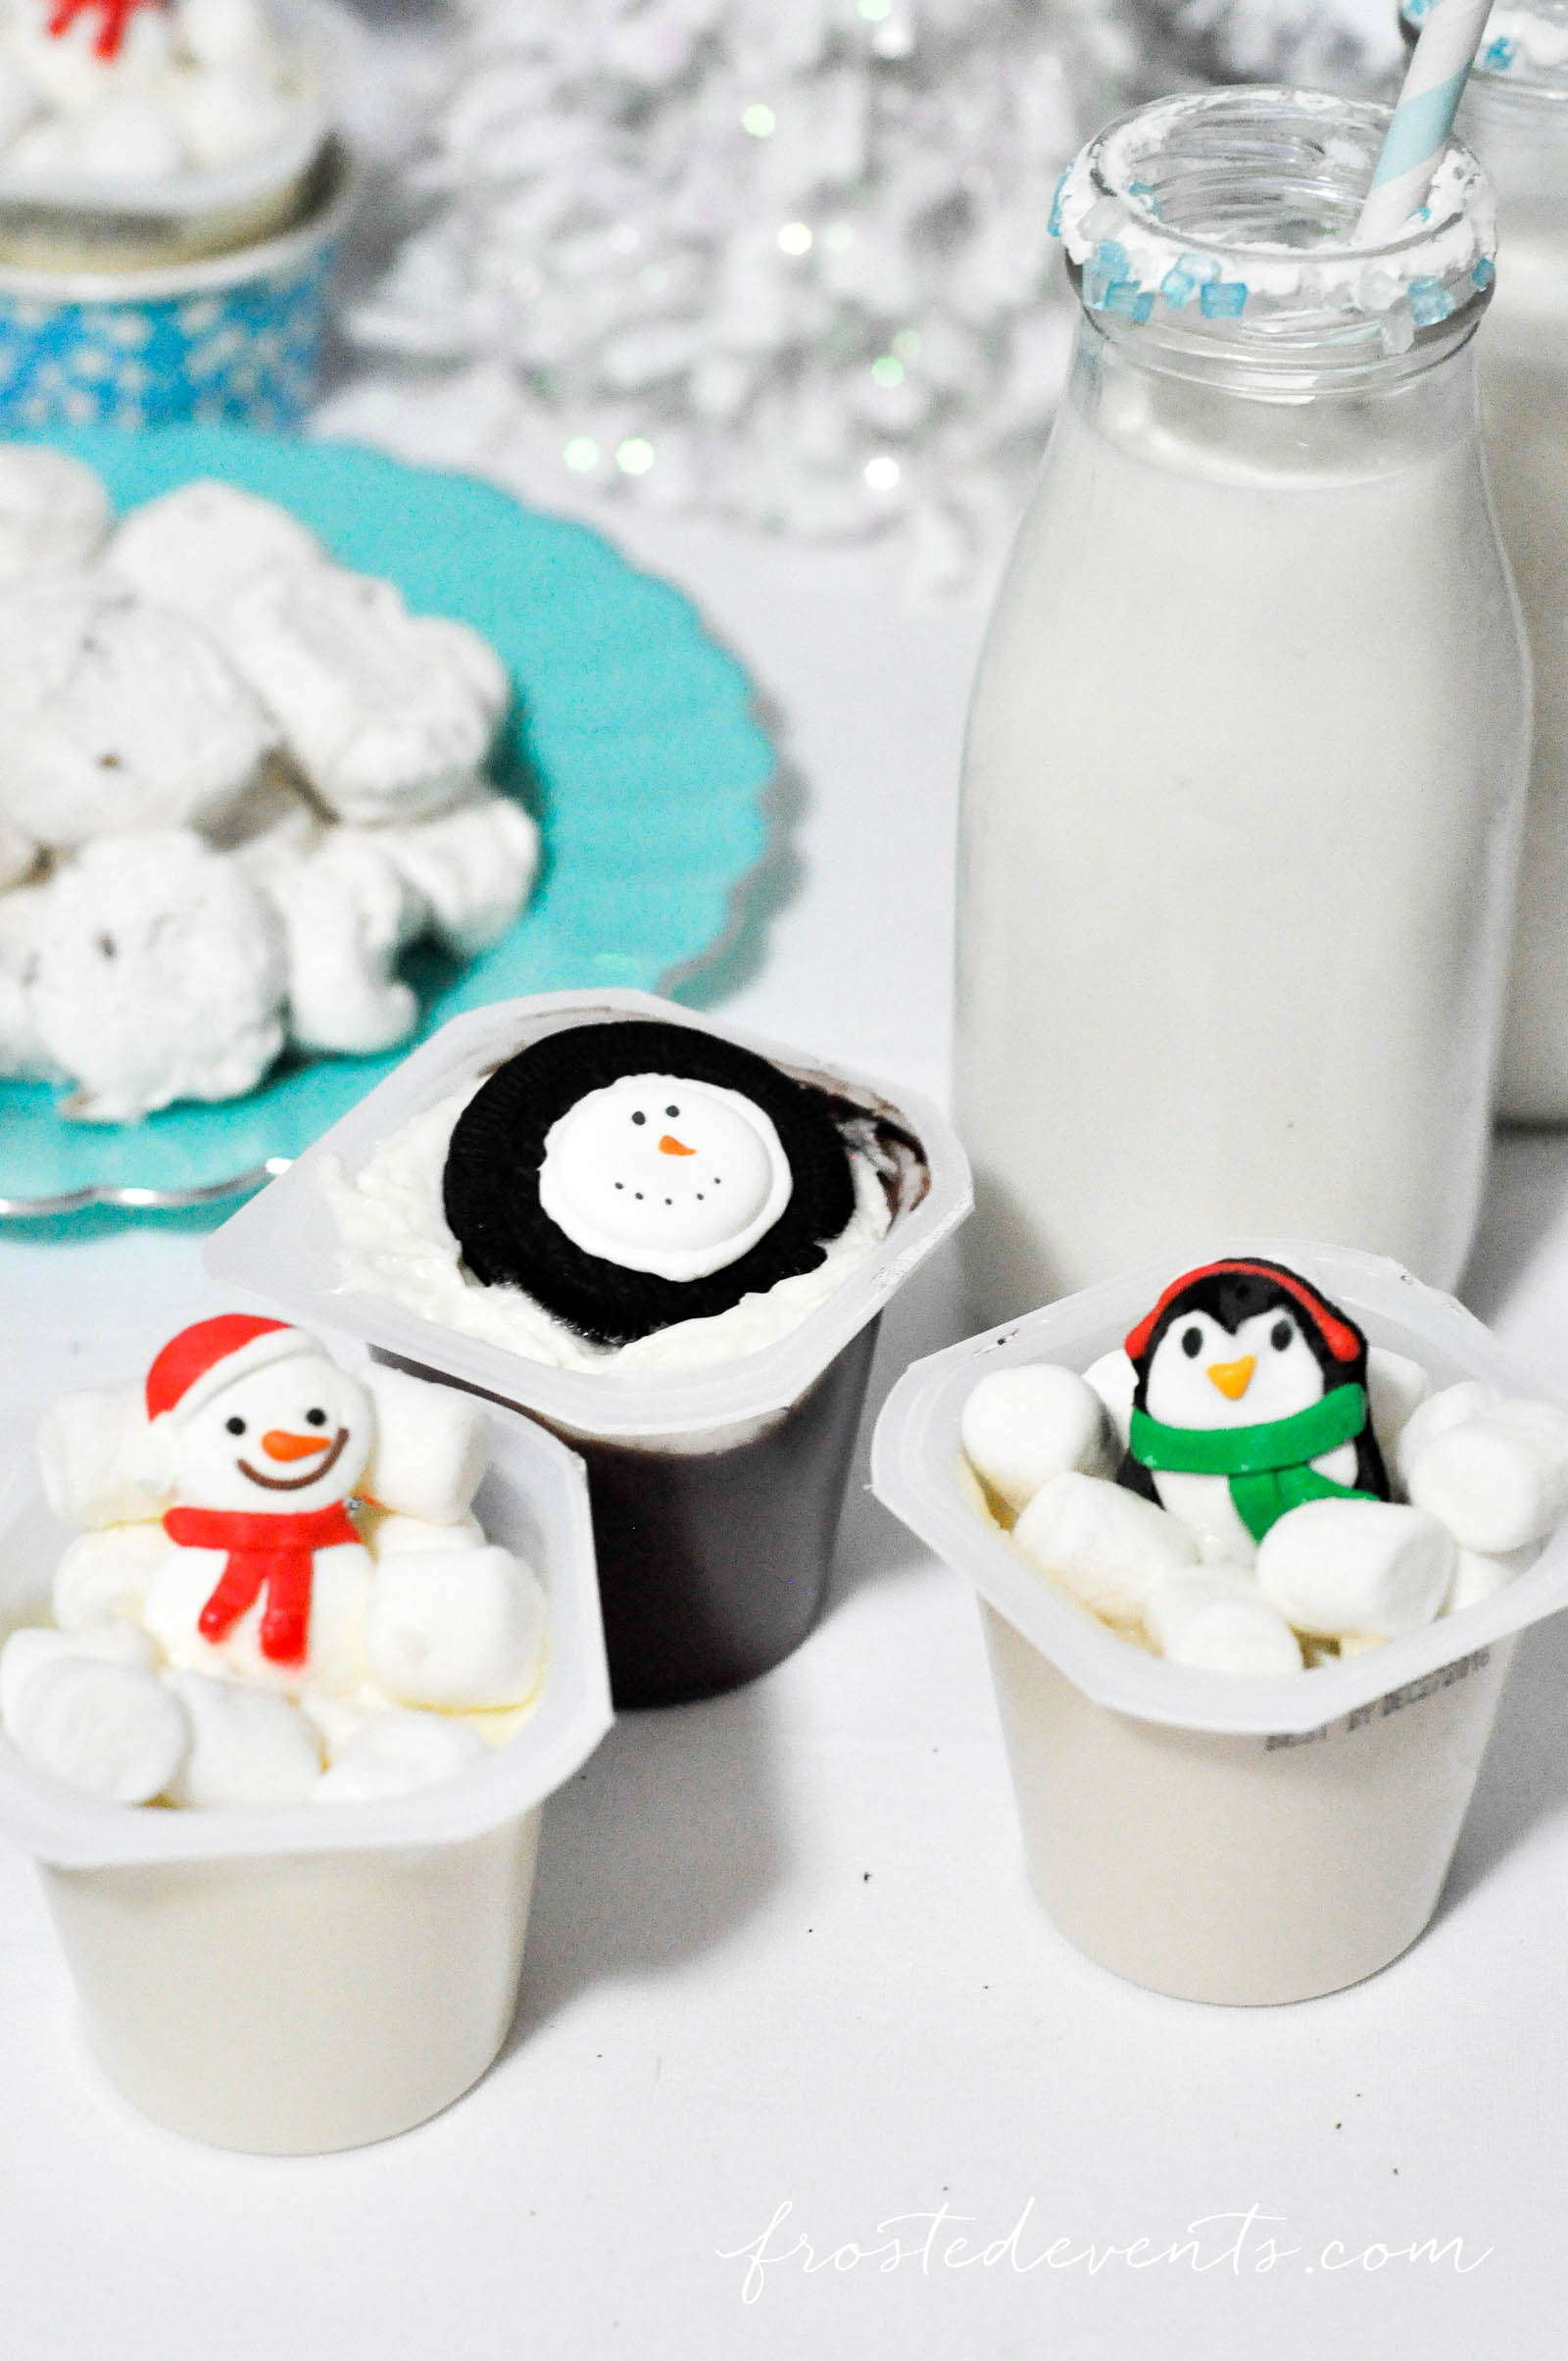 Winter Wonderland Party Winter Party Ideas with Snack Pack Christmas Treats frostedevents.com